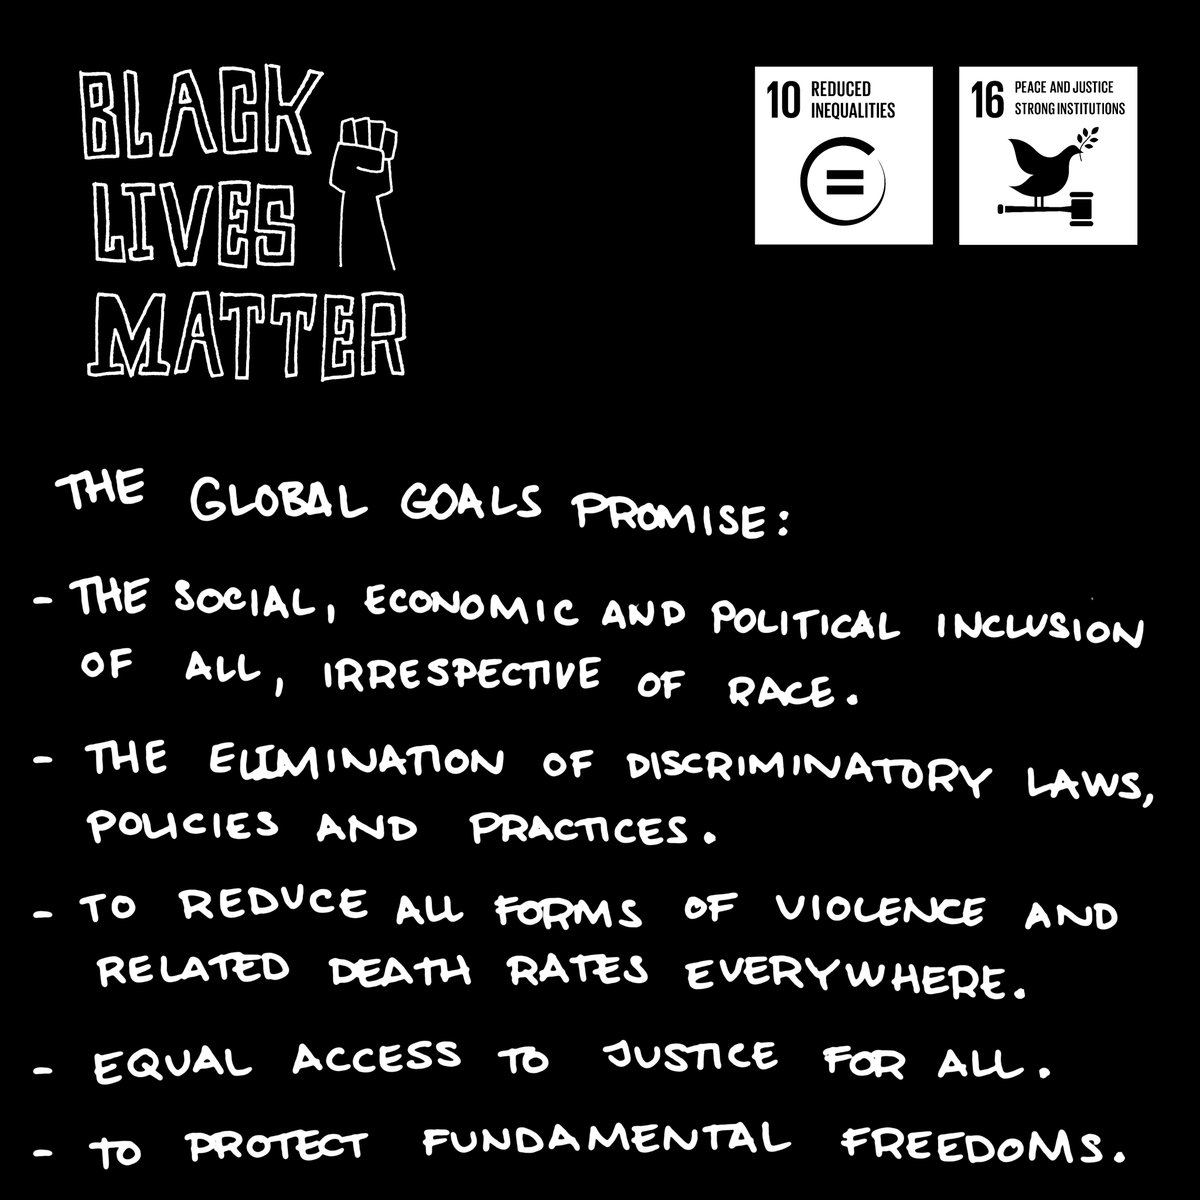 #BlackLivesMatter | As protests and demonstrations continue around the world, we want to reaffirm what #GlobalGoals  #Goal10 and #Goal16 stand for - justice and equality. Click to read the Global Goals promise...
#justice #equality #peaceandjustice #reducedinequalities